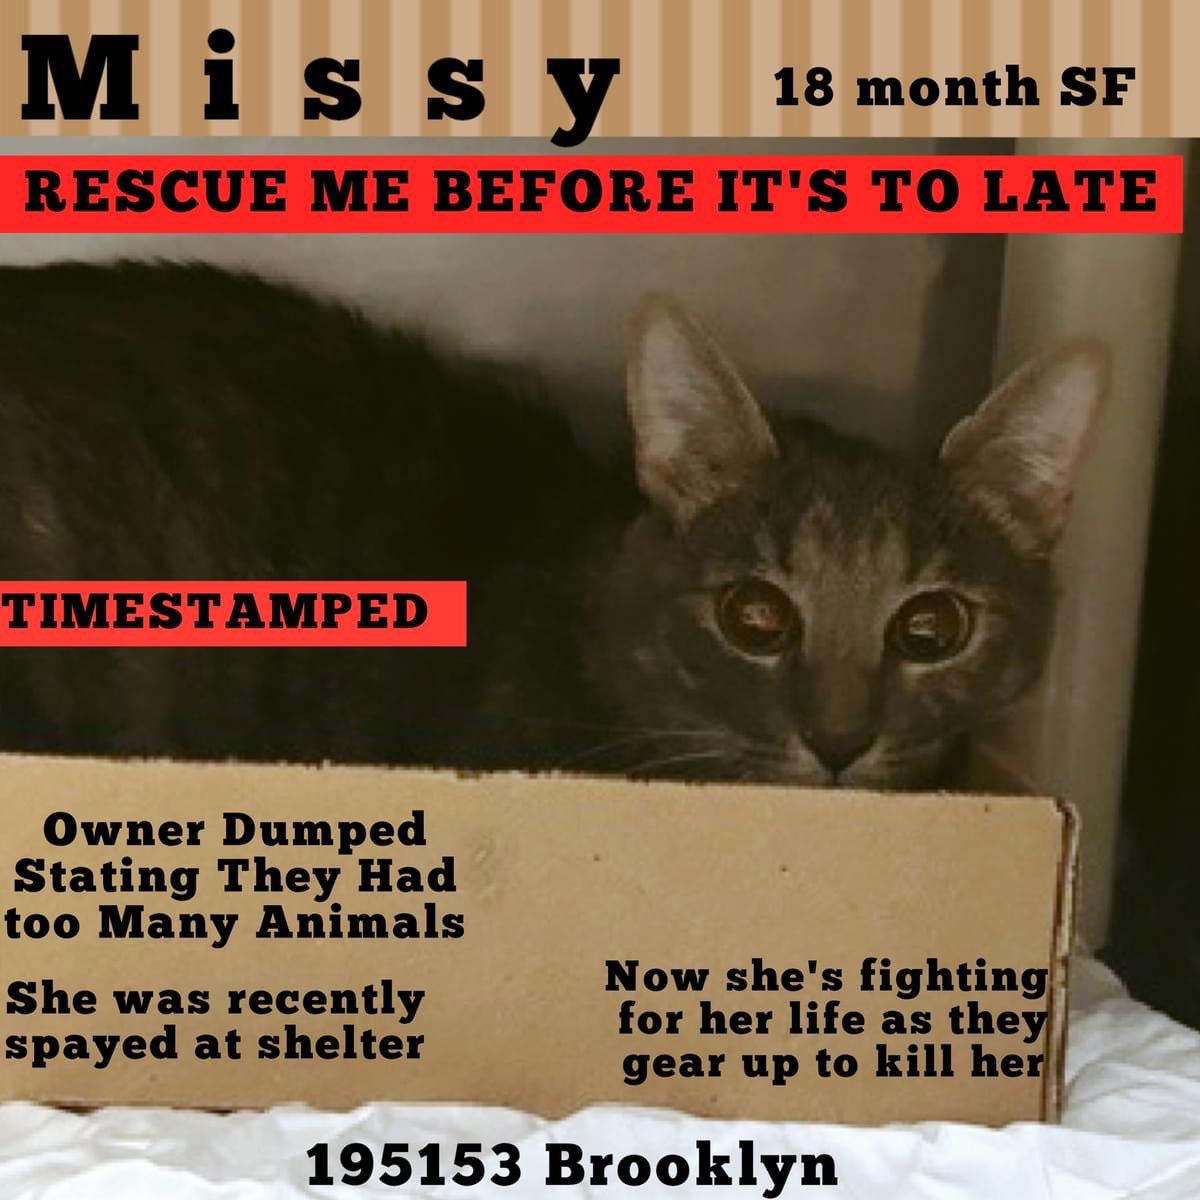 🆘Please RT-adopt-foster! 🆘 MISSY is on the “emergency placement” list at #ACCNYC and needs out of the shelter by 12 NOON 4/20! #URGENT #NYC #CATS #NYCACC #TeamKittySOS #AdoptDontShop #CatsOfTwitter newhope.shelterbuddy.com/Animal/Profile…